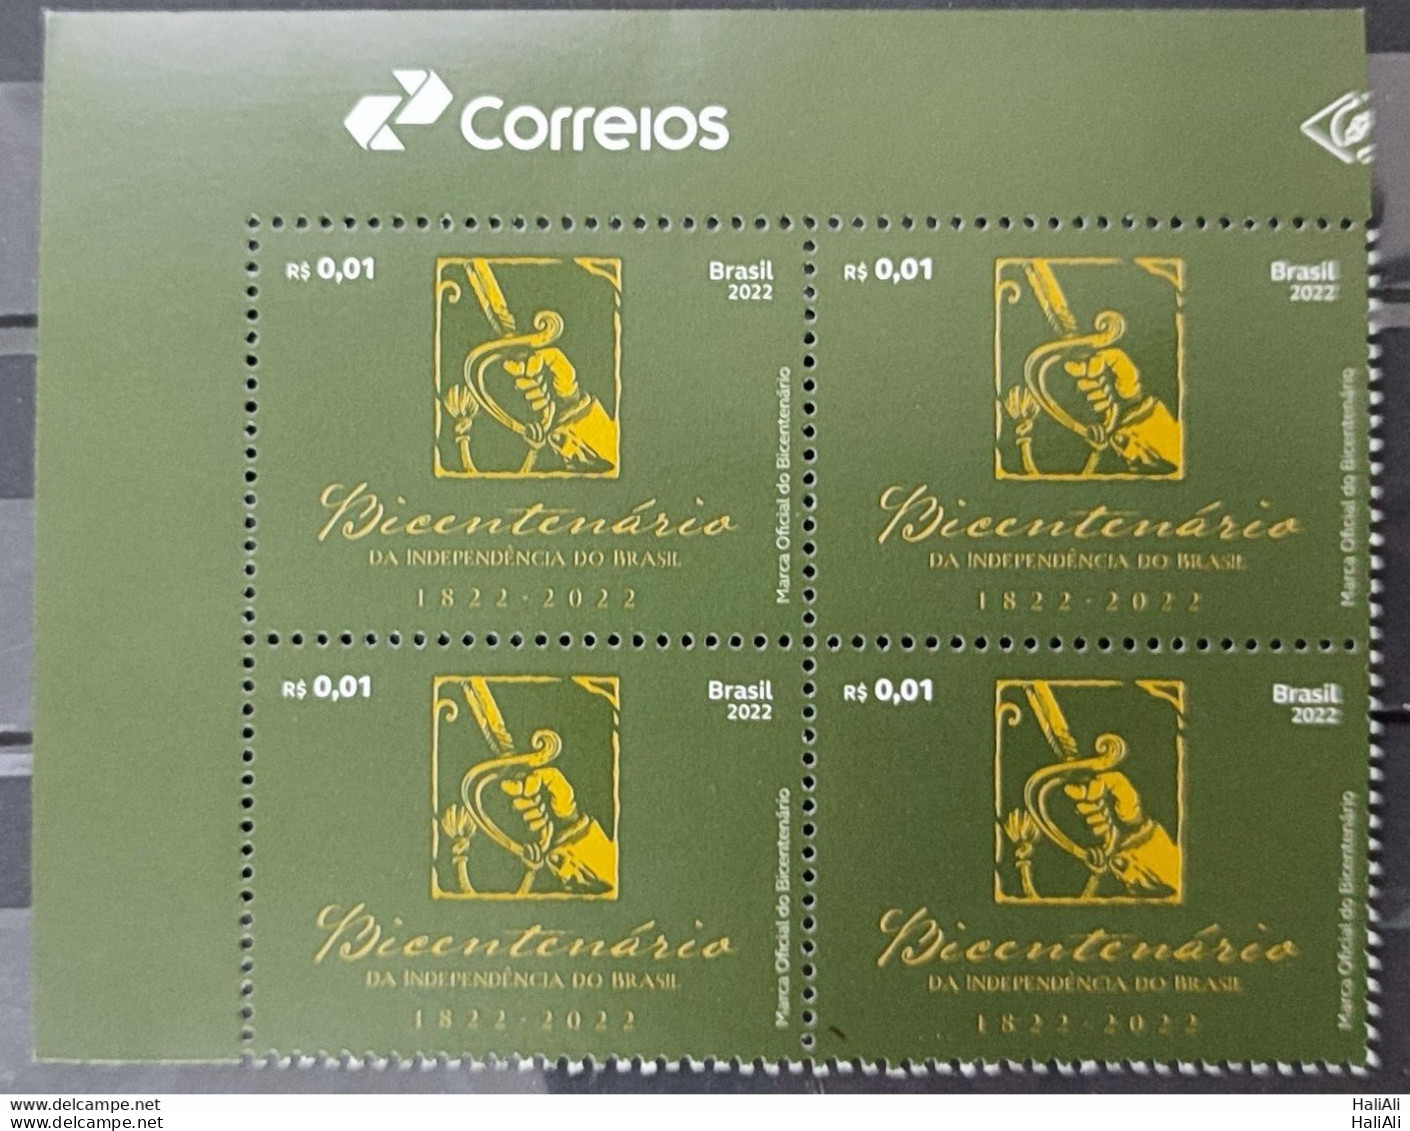 C 4055 Brazil Stamp Bicentennial Of Independence Official Brand Sword Portugal 2022 Block Of 4 Vignette Correios - Unused Stamps